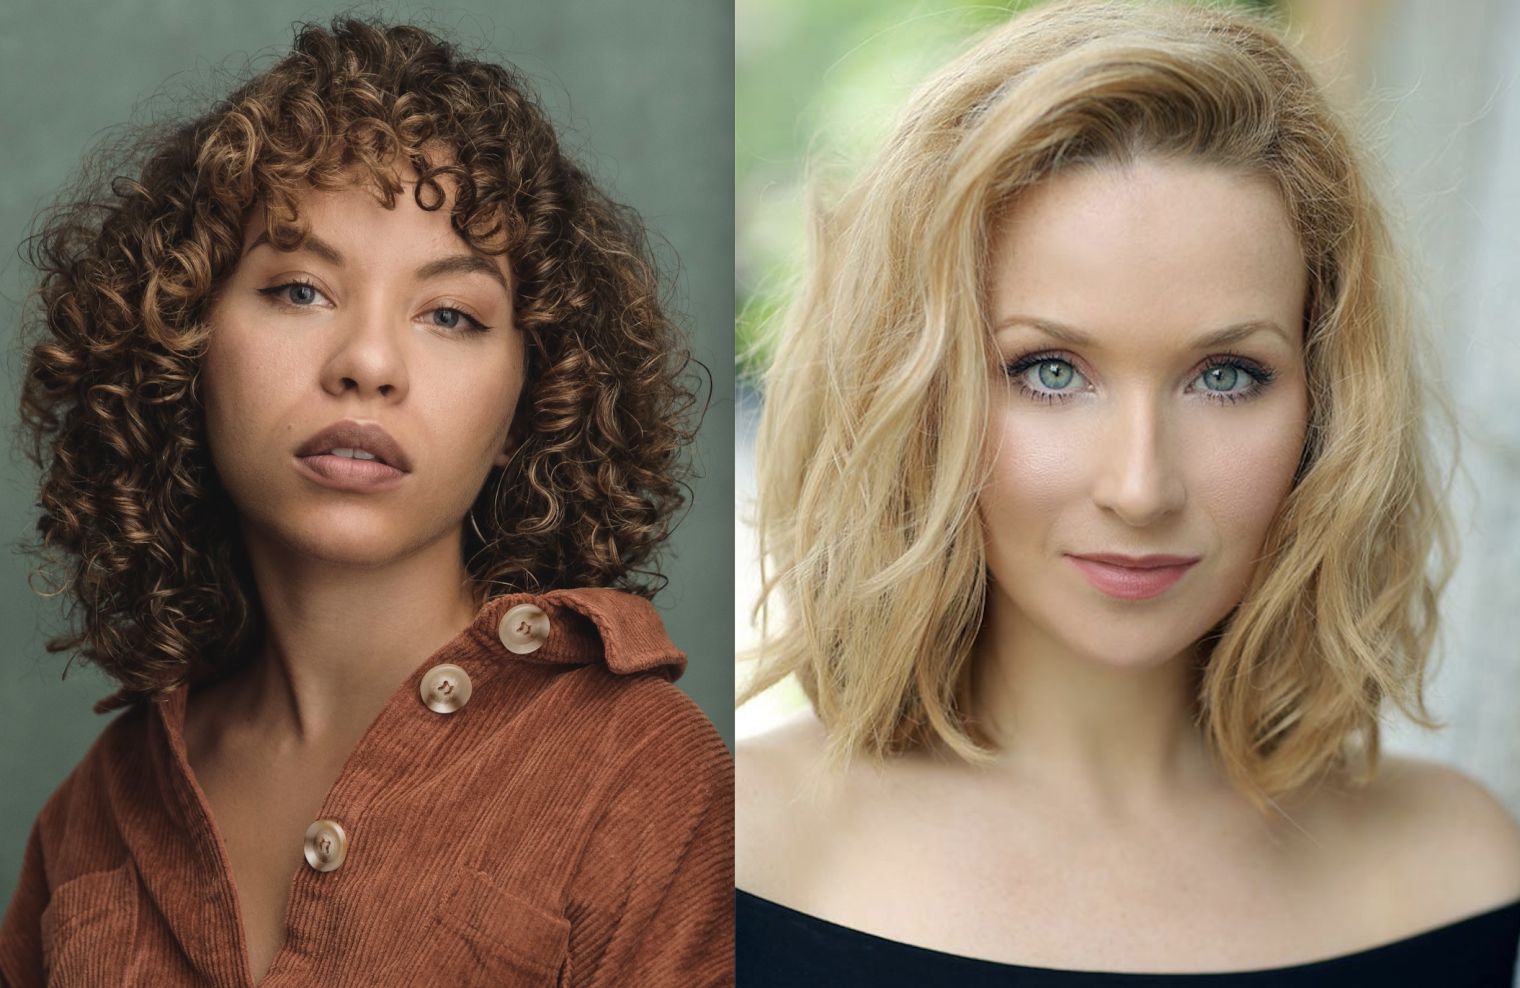 Saffron Coomber and Amy Beth Hayes to star in Sir Lenny Henry's hugely anticipated 6-part series Three Little Birds